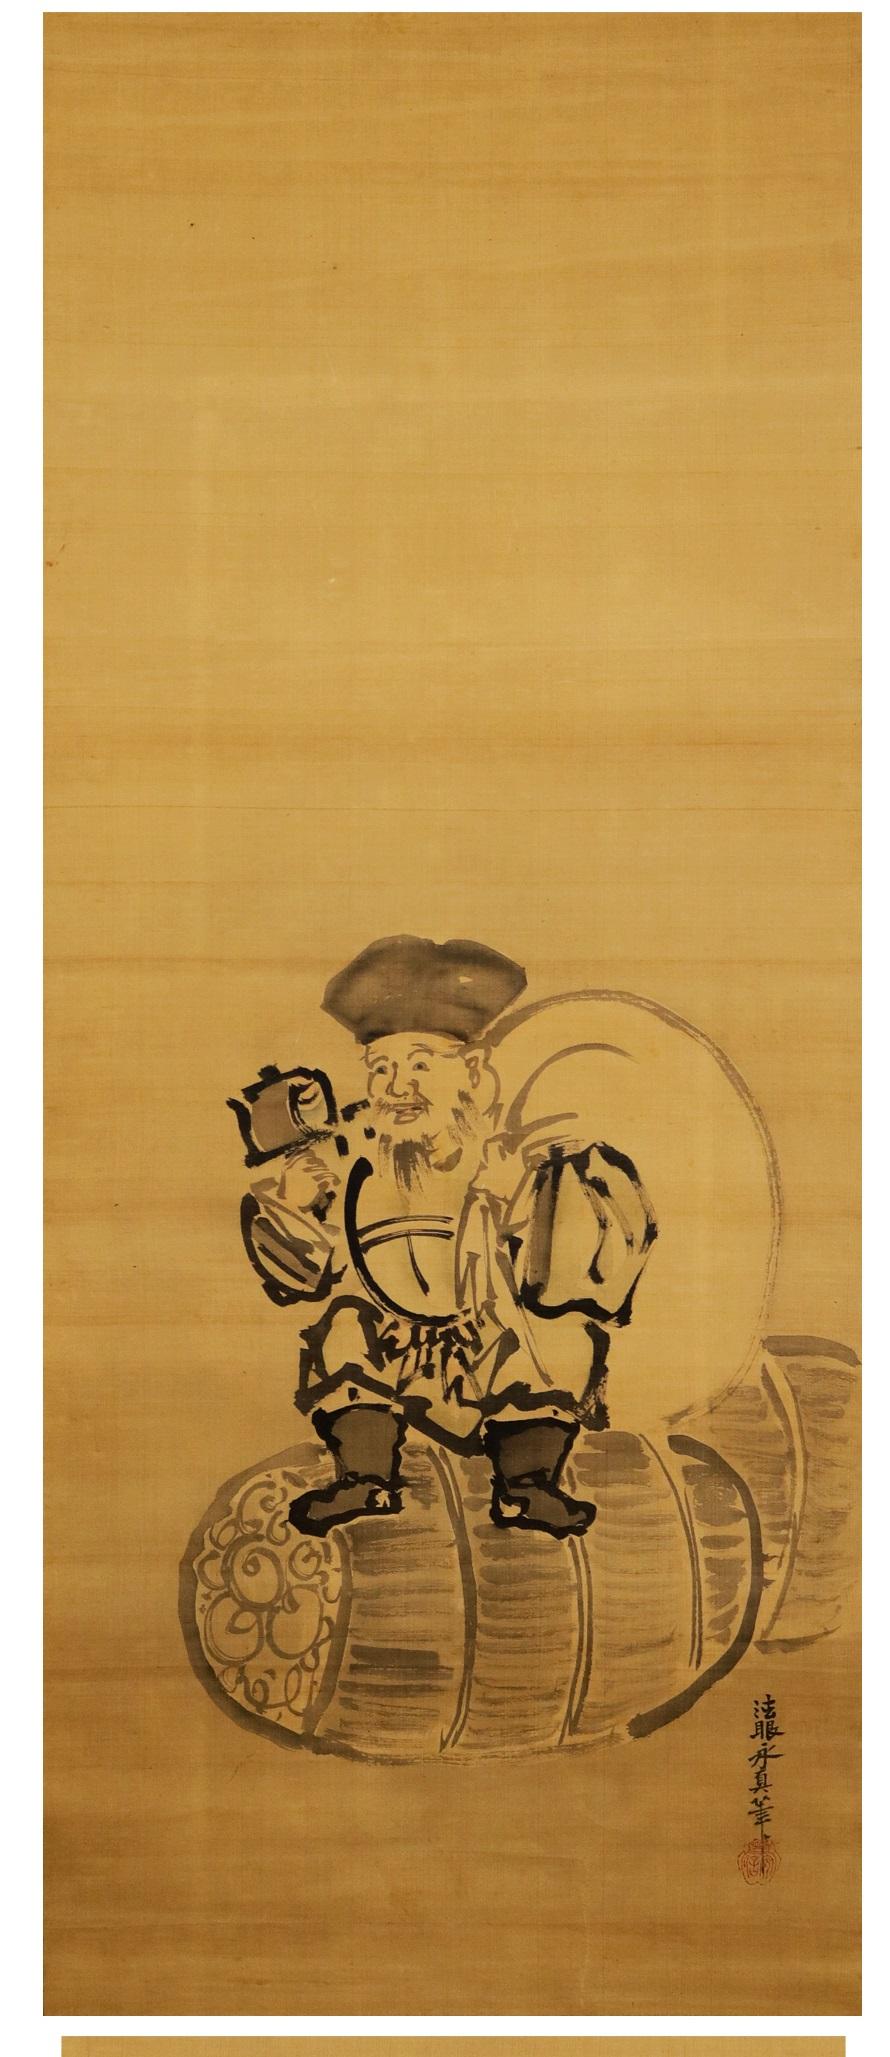 Antique Japanese 17th c Edo Scroll Kano Yosanobu Buddhist Painting In Good Condition For Sale In Amsterdam, Noord Holland